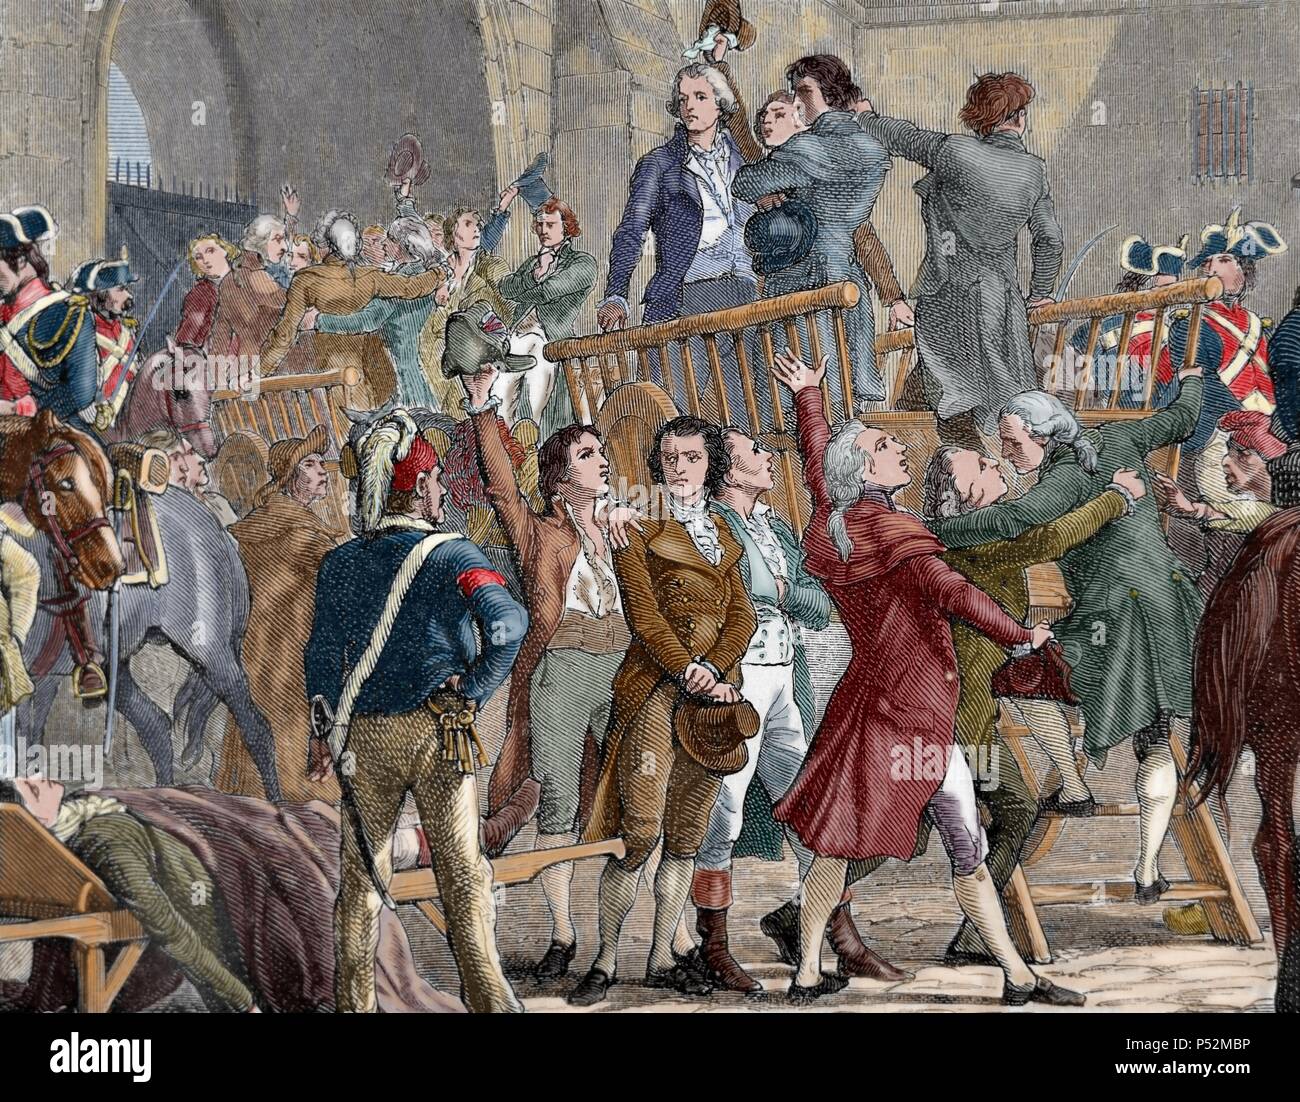 French Revolution (1789). The Girondists out of jail to go to the gallows. Moderate politicians and federalists, belonging to the provincial bourgeoisie, were accused of conspiring against the unity of the Republic. Its leaders were beheaded by order of Robespierre in 1793. Were known as Rolandistes or Brissotins. Colored engraving. 19th century. Stock Photo